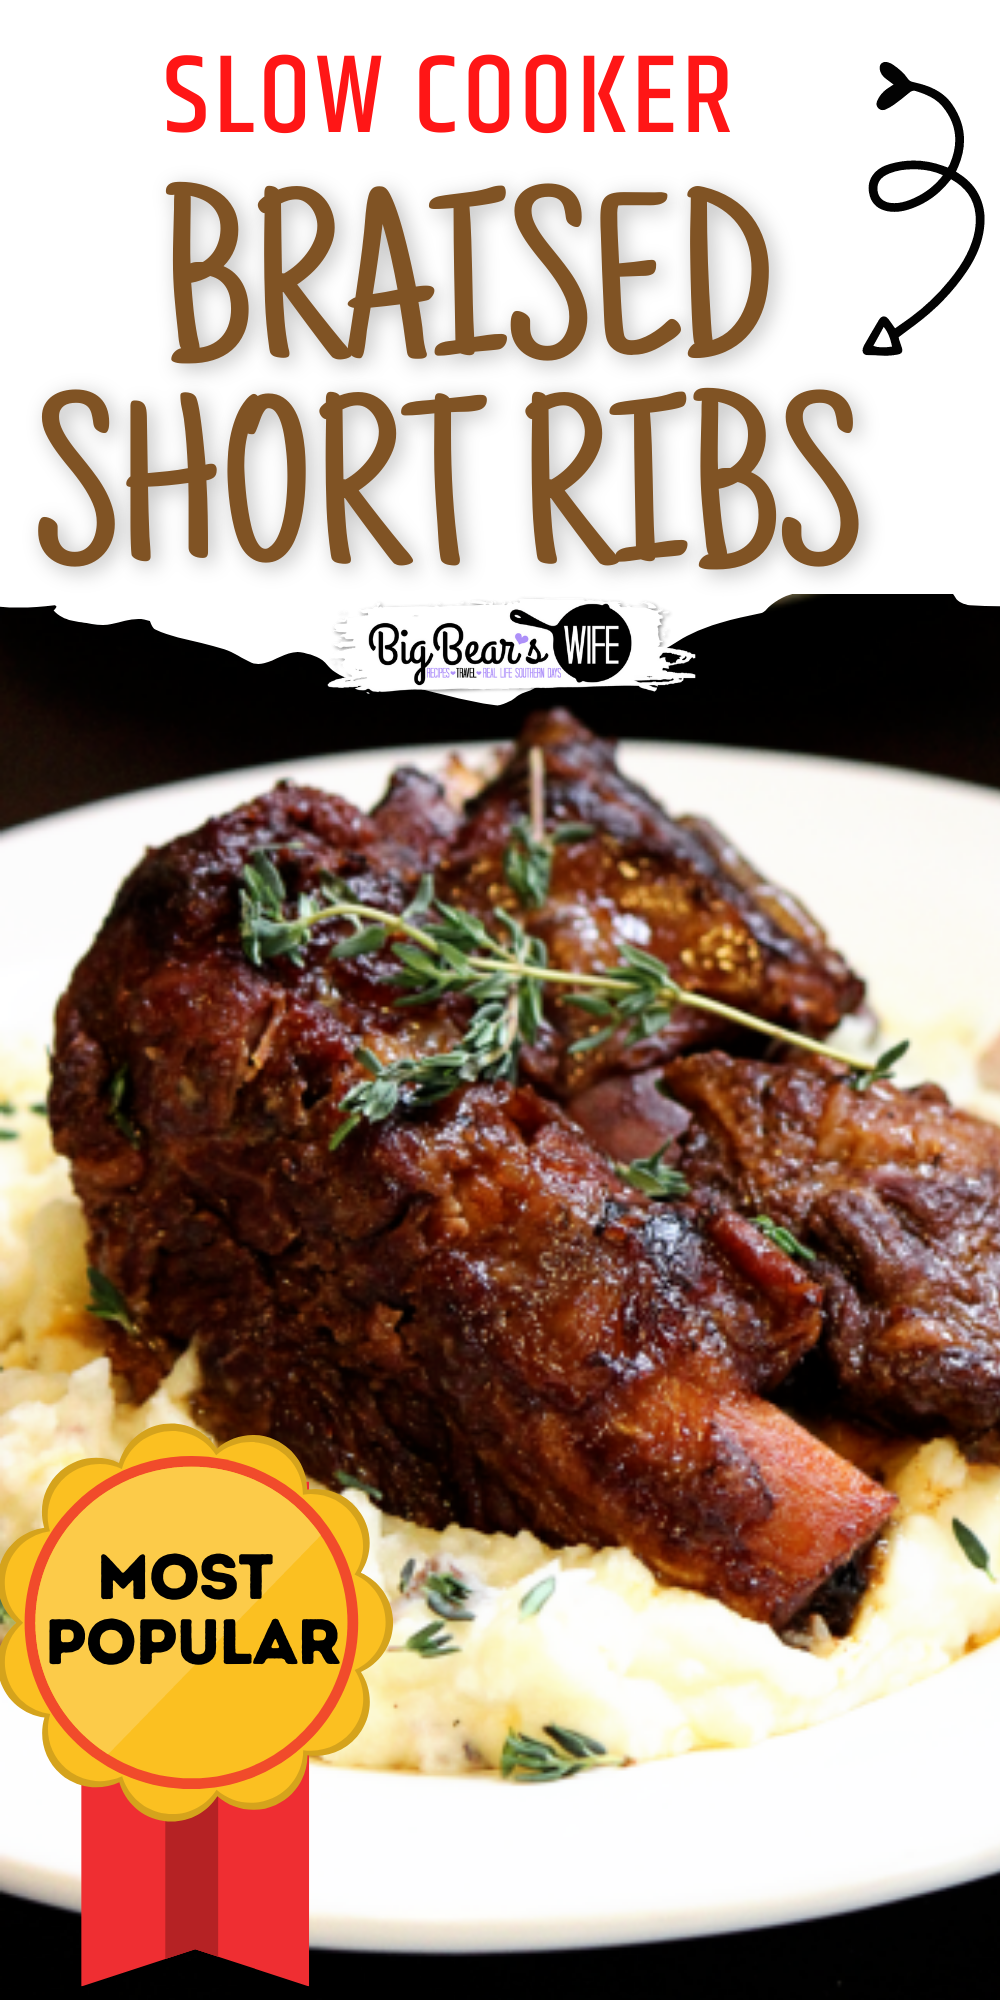 Slow Cooker Braised Short Ribs - Ready to make one of the most popular recipes on BigBearsWife.com. These Slow Cooker Braised Short Ribs are always a hit! This is the best beef short ribs recipe in my opinion. Perfect for a weekday dinner or for a fancy Sunday Dinner! This dinner recipe is super easy to make and it taste amazing!  via @bigbearswife